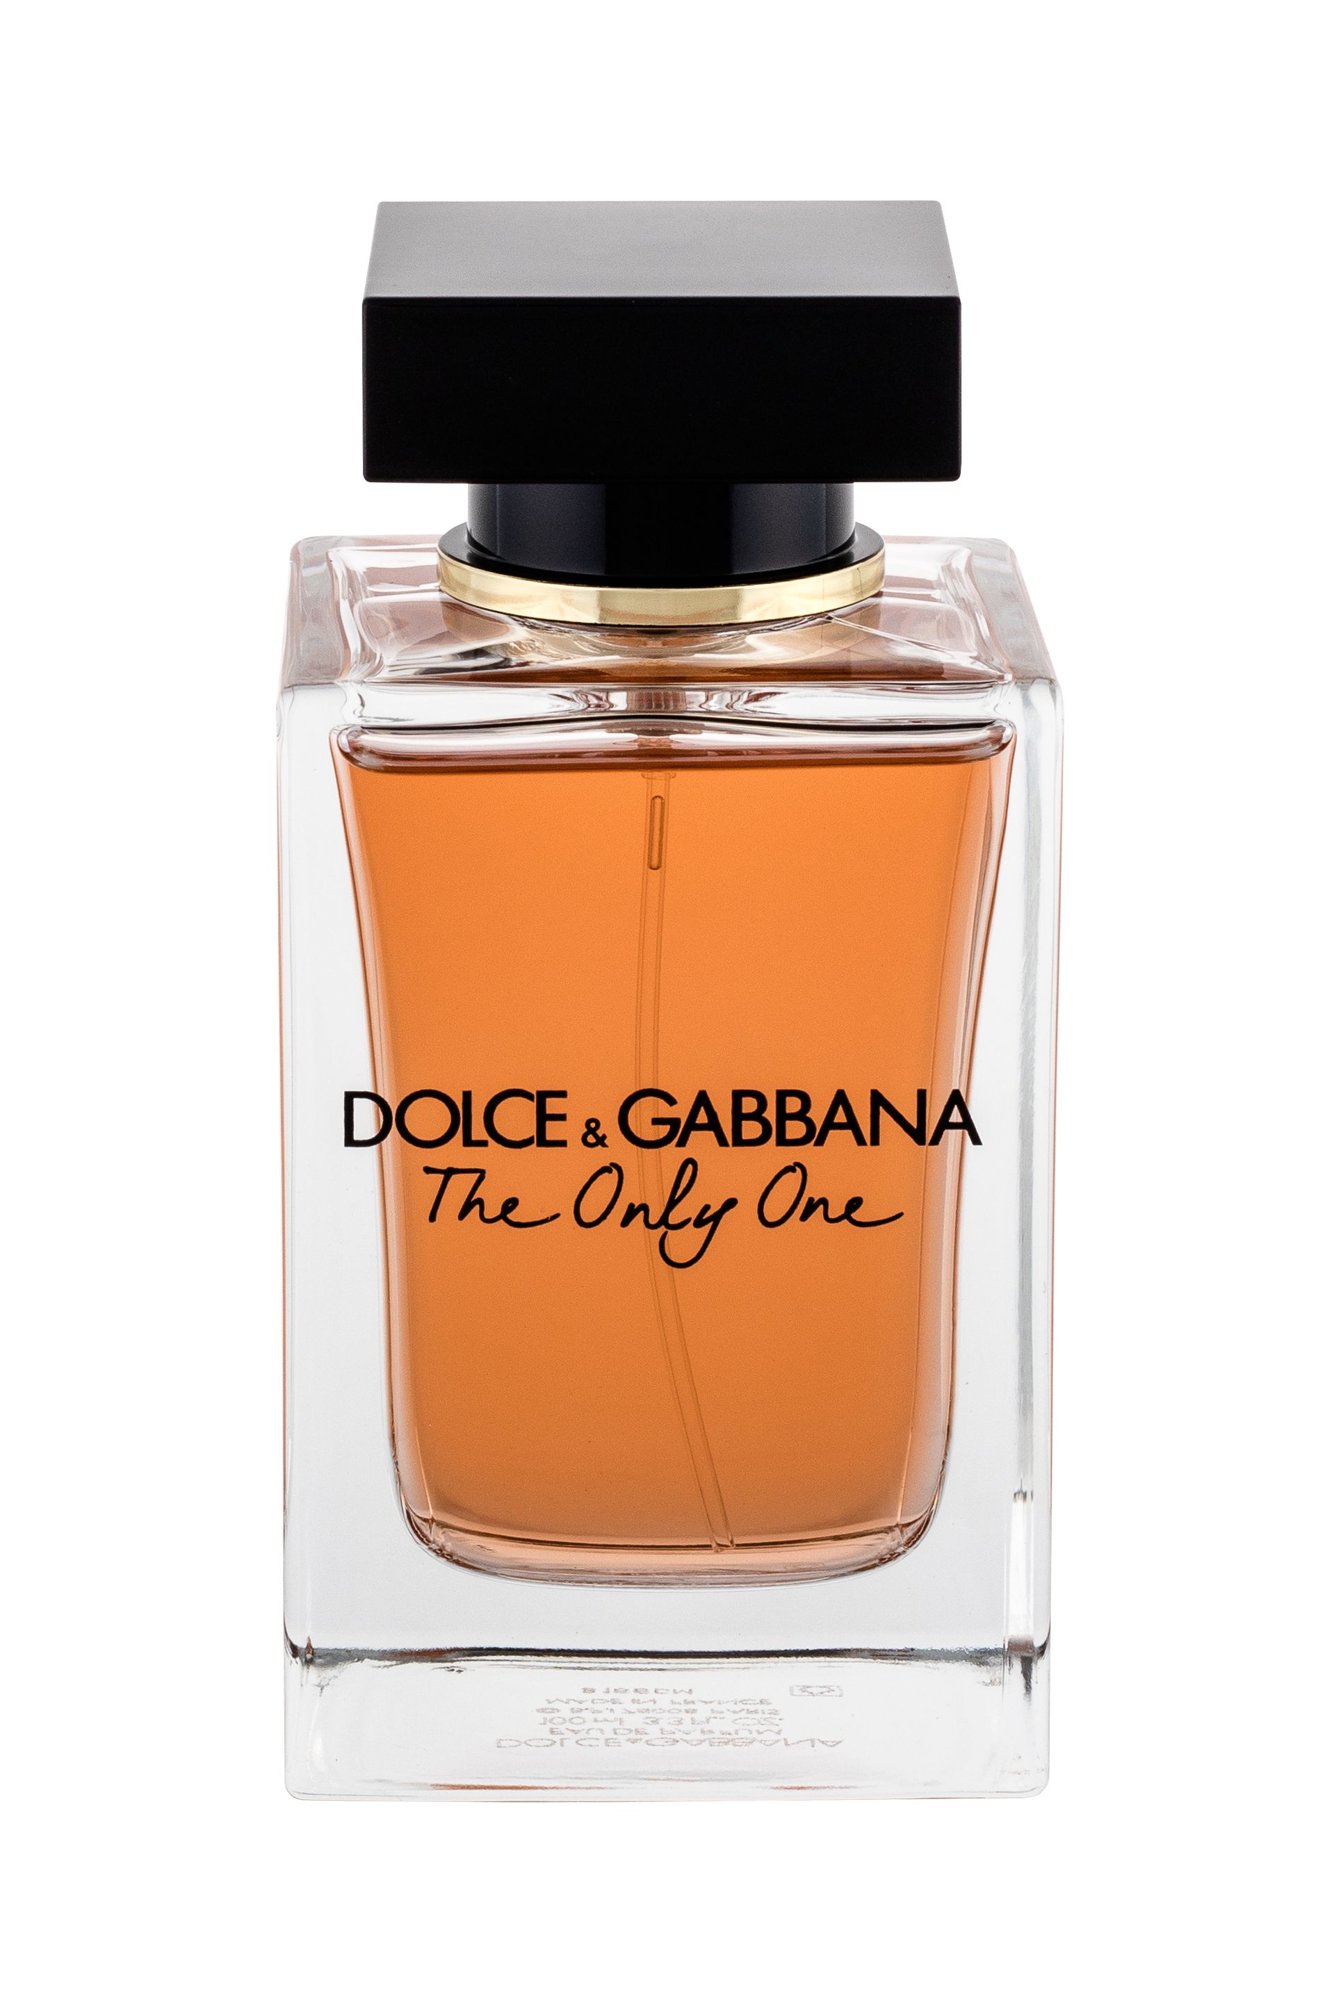 Духи dolce only one. Dolce Gabbana the only one 100ml. Dolce Gabbana the only one 2 100 мл. Dolce & Gabbana the only one 100 мл. Духи Dolce Gabbana only one женские 100ml.